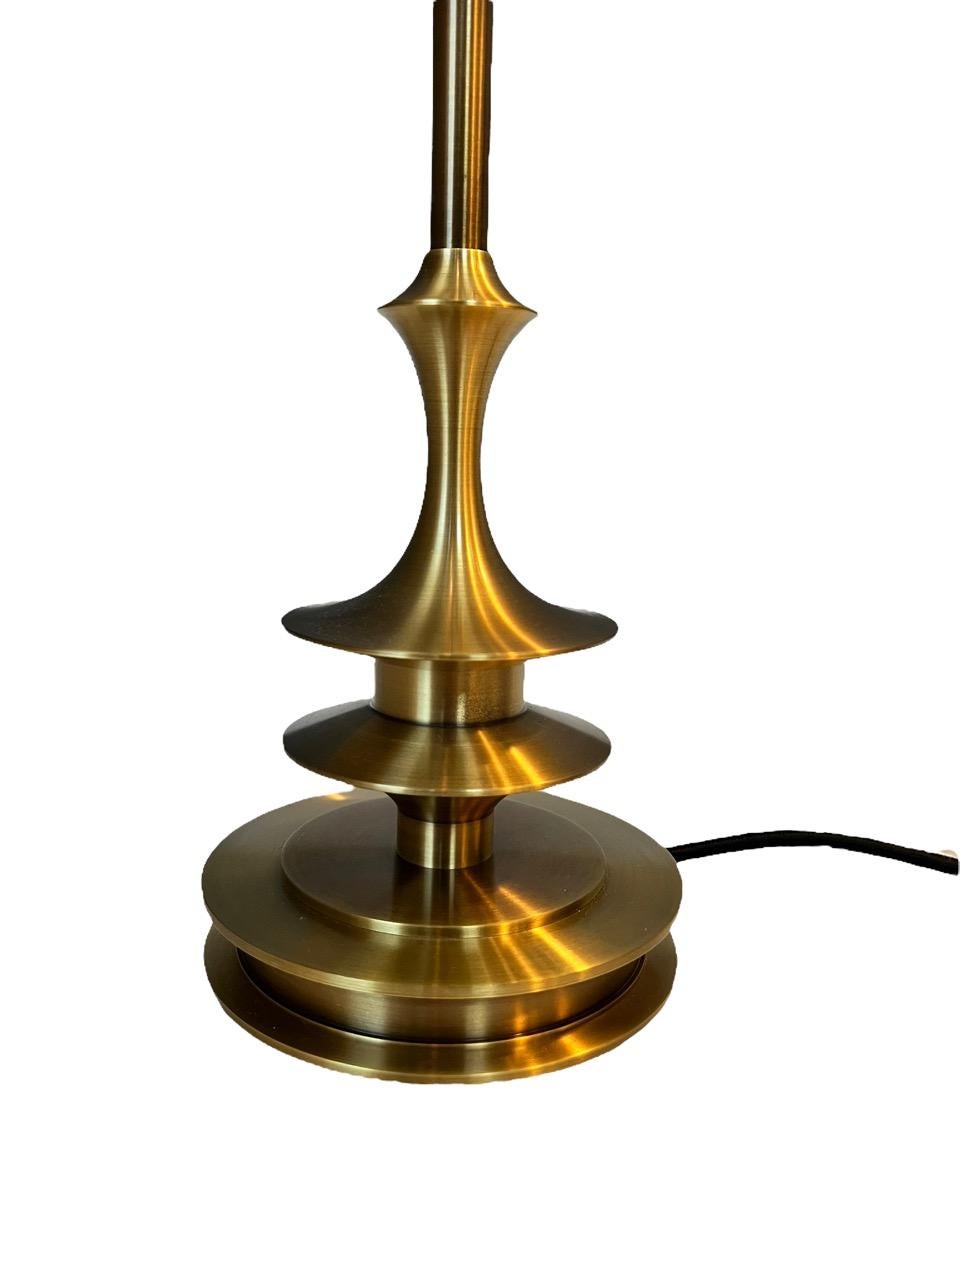 Contemporary Pair of Side Table Lamps, Solid Brass by Designer Solis Betancourt 13